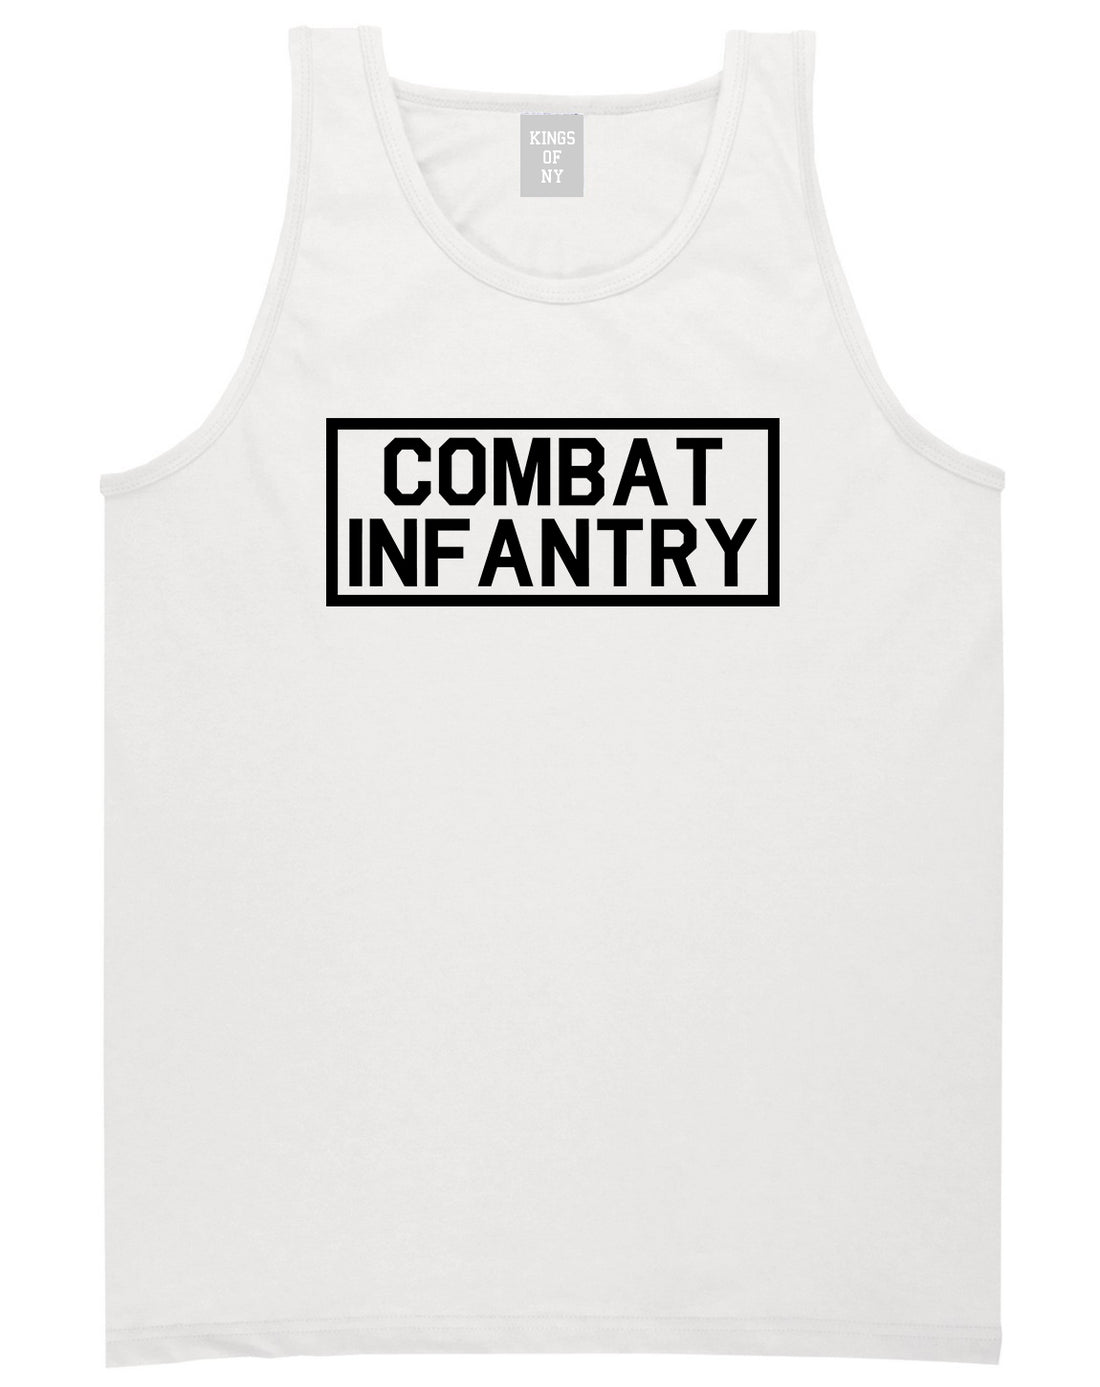 Combat Infantry White Tank Top Shirt by Kings Of NY